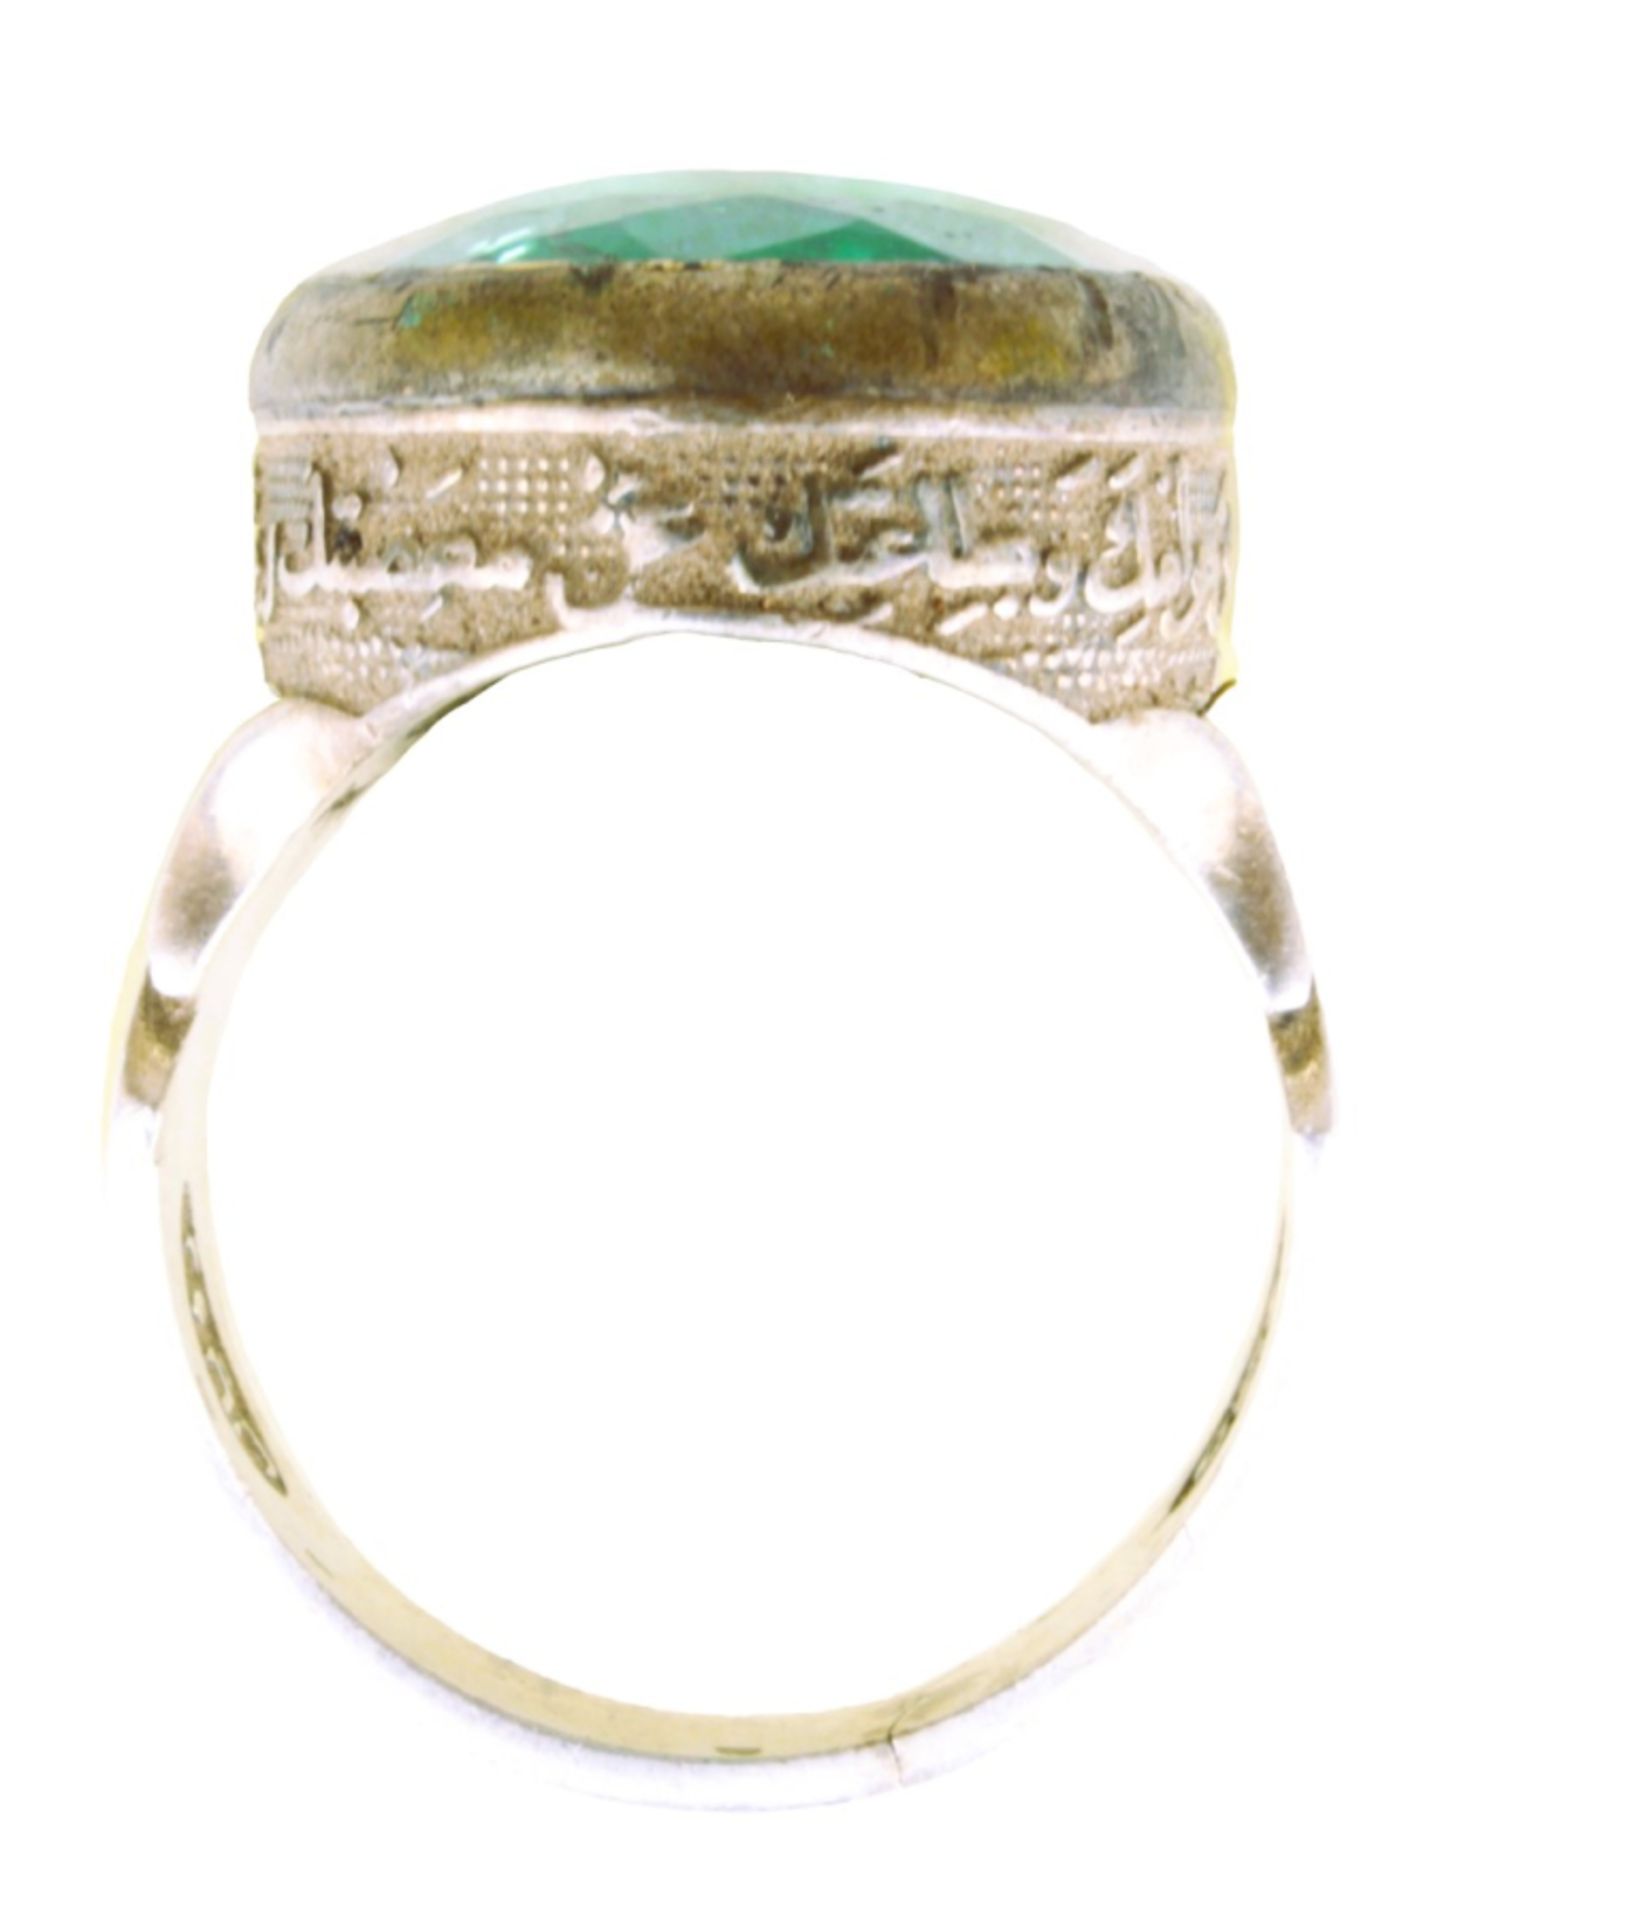 Silver ring with green stone engraved with islamic script - Image 4 of 7